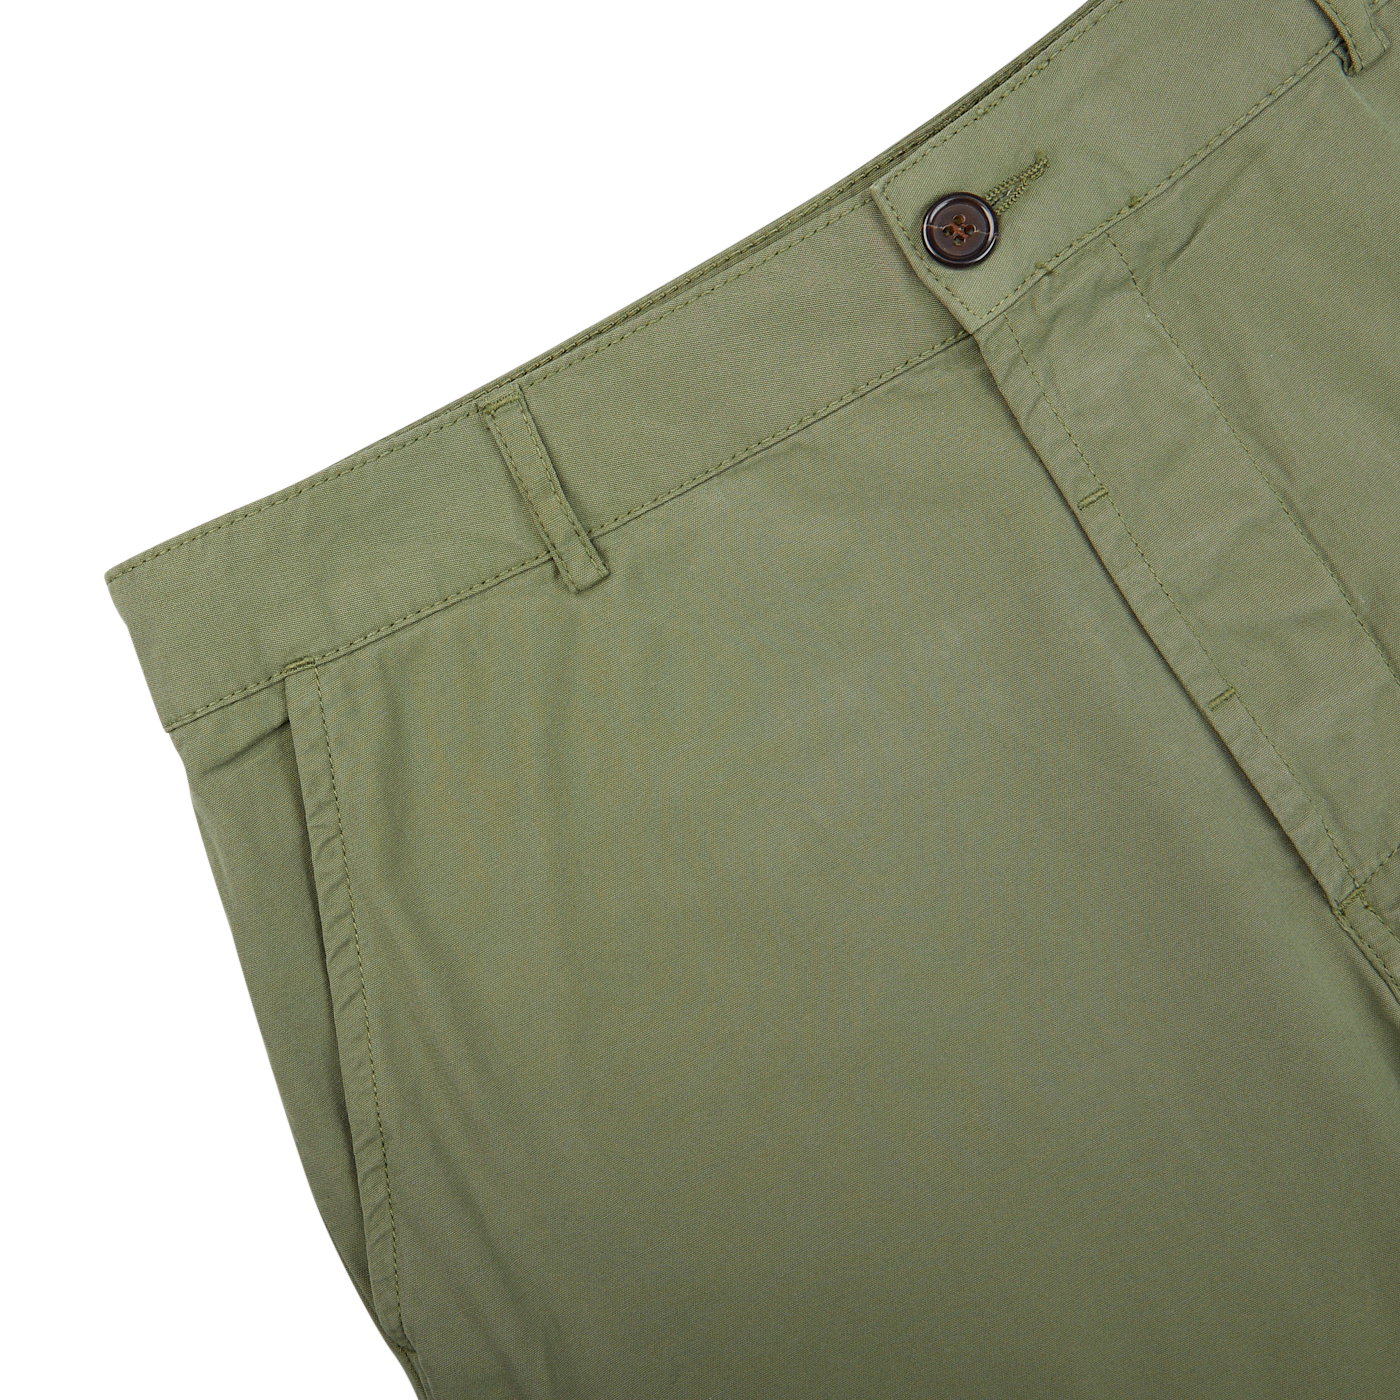 Green Birch Green Cotton Summer Canvas Military Chinos with a button closure on a white background by Universal Works.